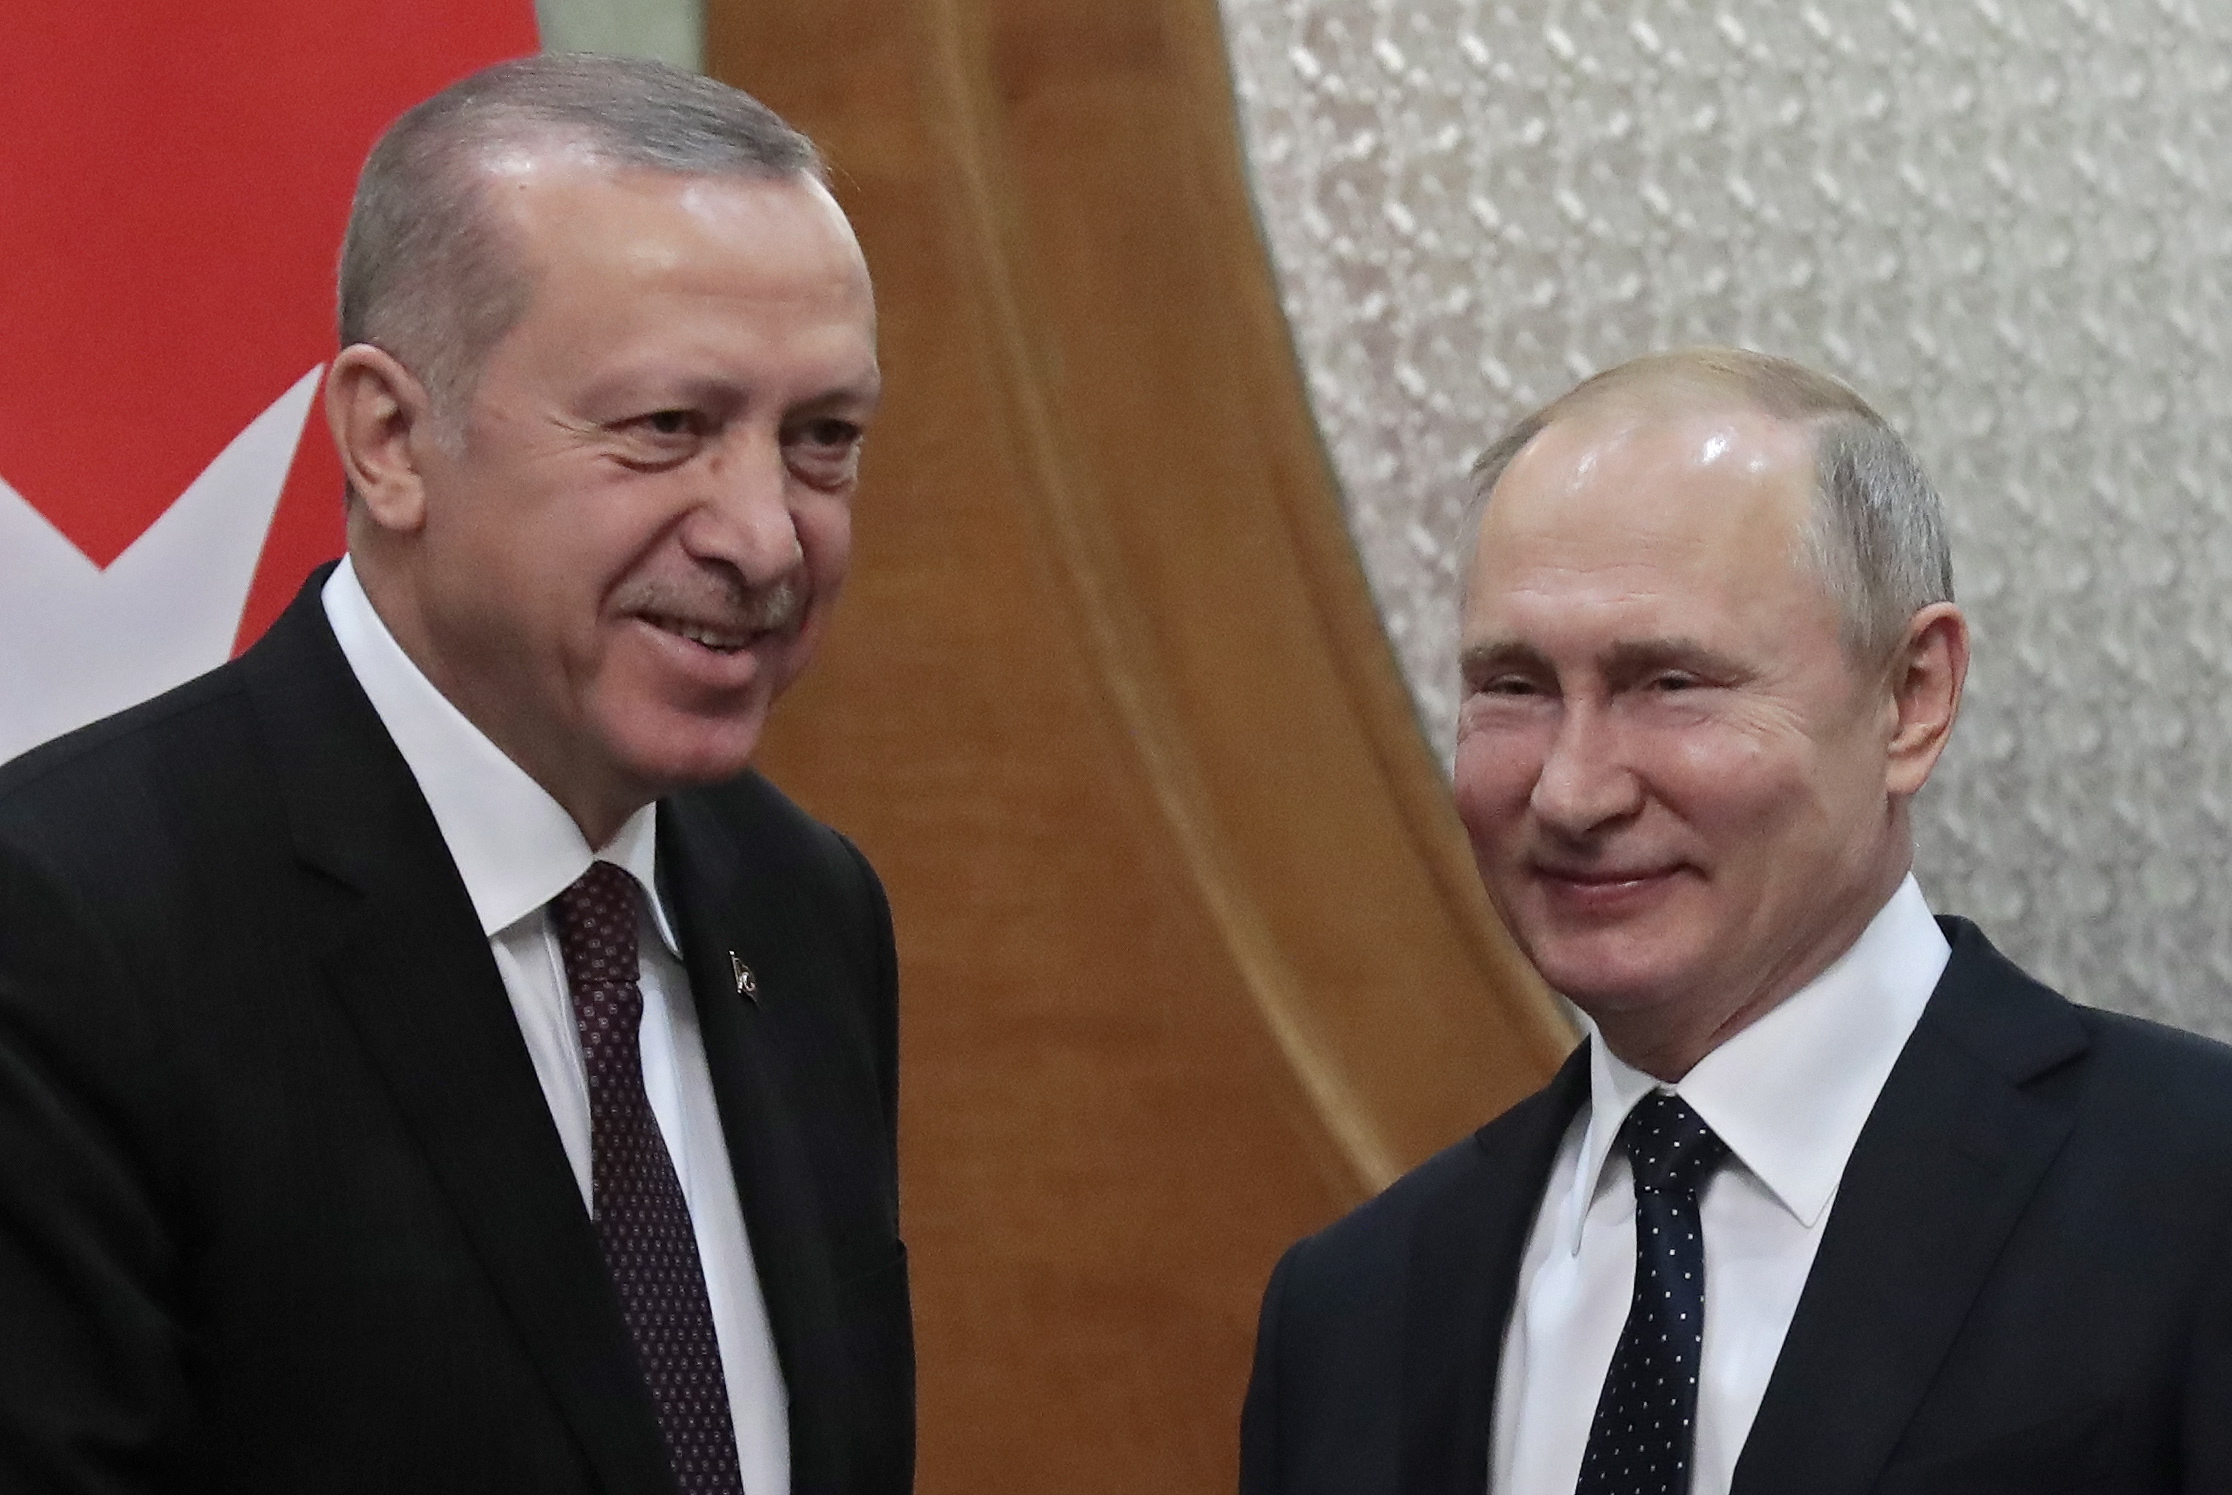 epa07368950 Turkish President Recep Tayyip Erdogan (L) and Russian President Vladimir Putin (R) smile during their meeting in the Black sea resort of Sochi, Russia, 14 February 2019. The leaders of Russia, Turkey and Iran held in Sochi on 14 February their fourth trilateral meeting to discuss further joint steps with a view to a long-term peace settlement in Syria.  EPA/SERGEI CHIRIKOV